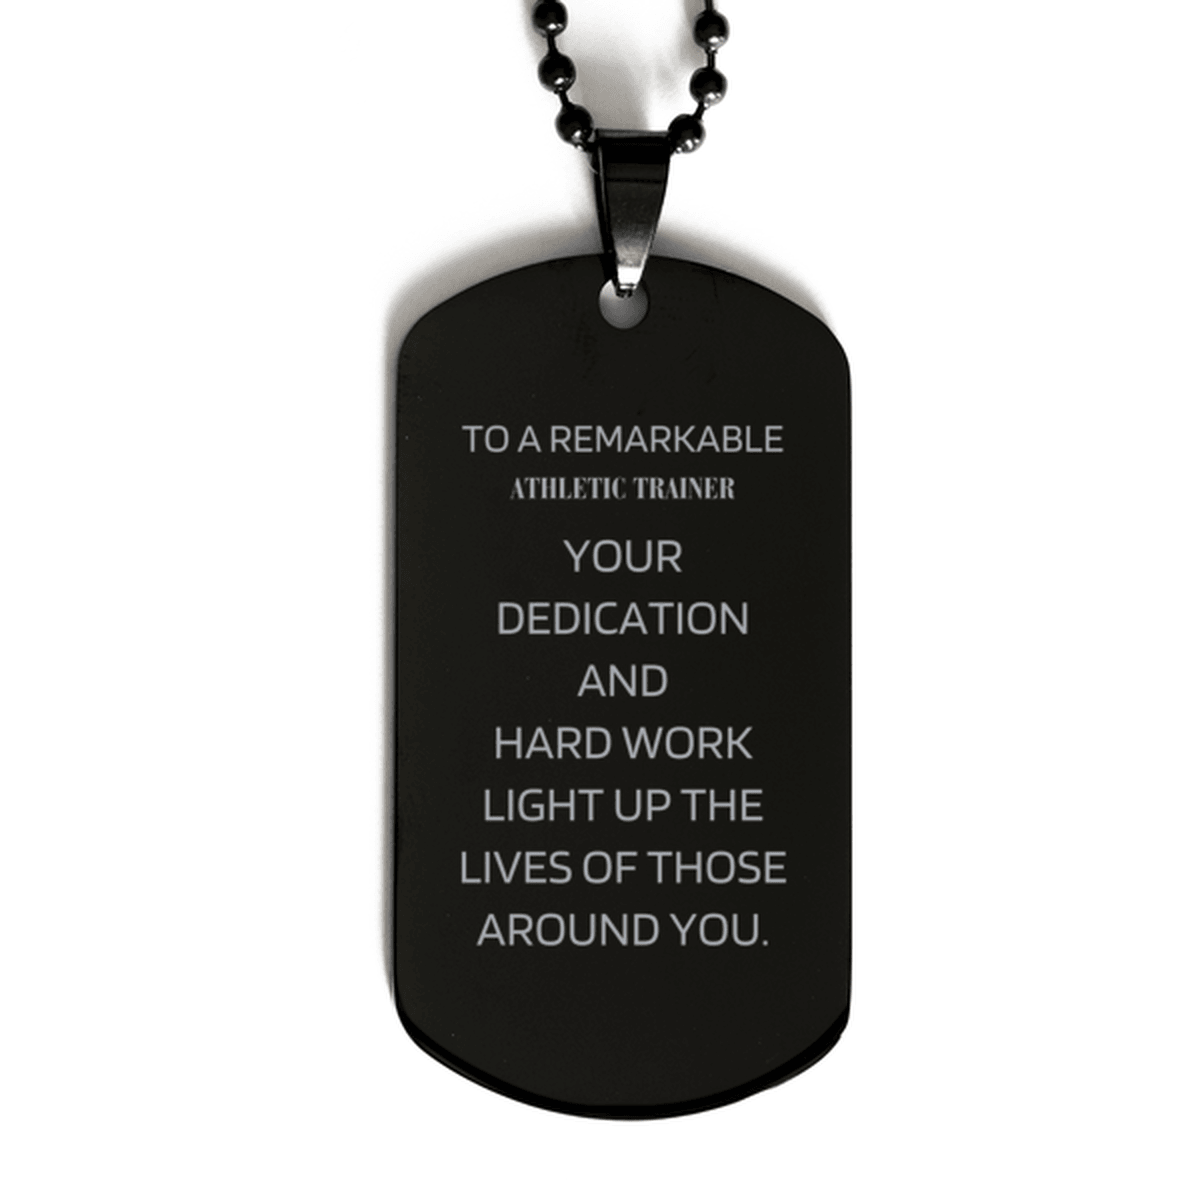 Remarkable Athletic Trainer Gifts, Your dedication and hard work, Inspirational Birthday Christmas Unique Black Dog Tag For Athletic Trainer, Coworkers, Men, Women, Friends - Mallard Moon Gift Shop